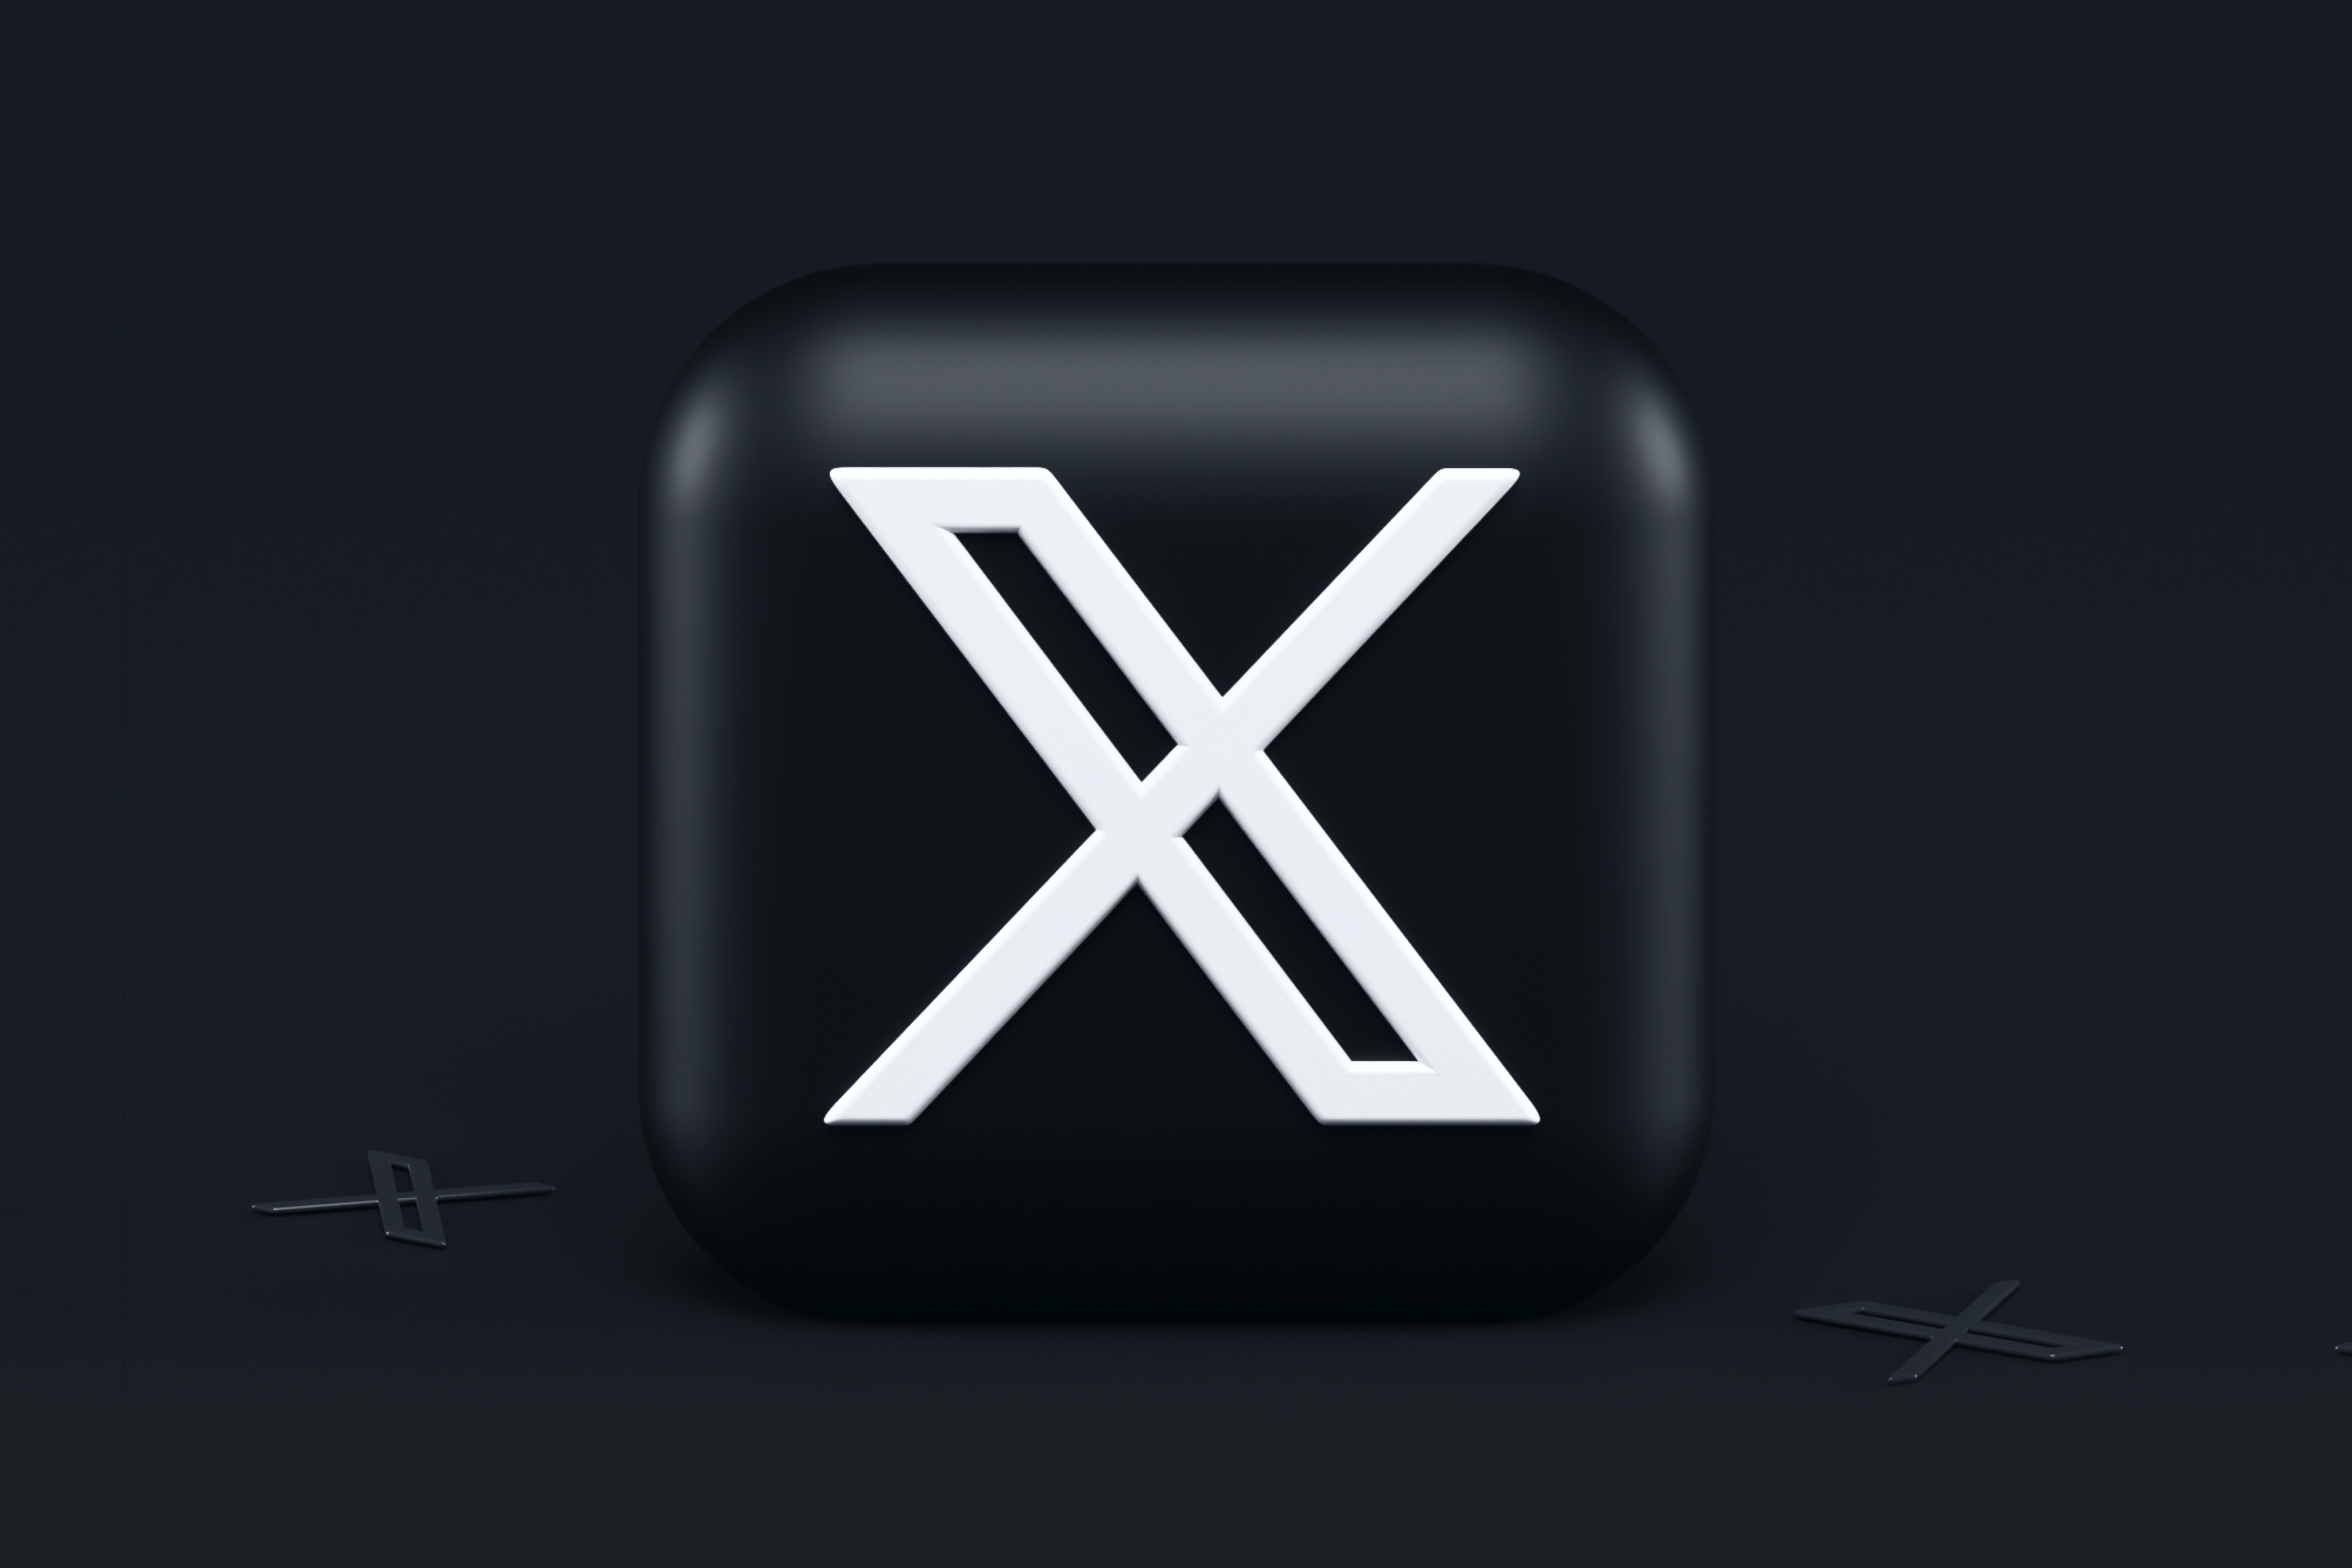 X (trade)marks the spot: not a textbook example of a successful rebranding exercise